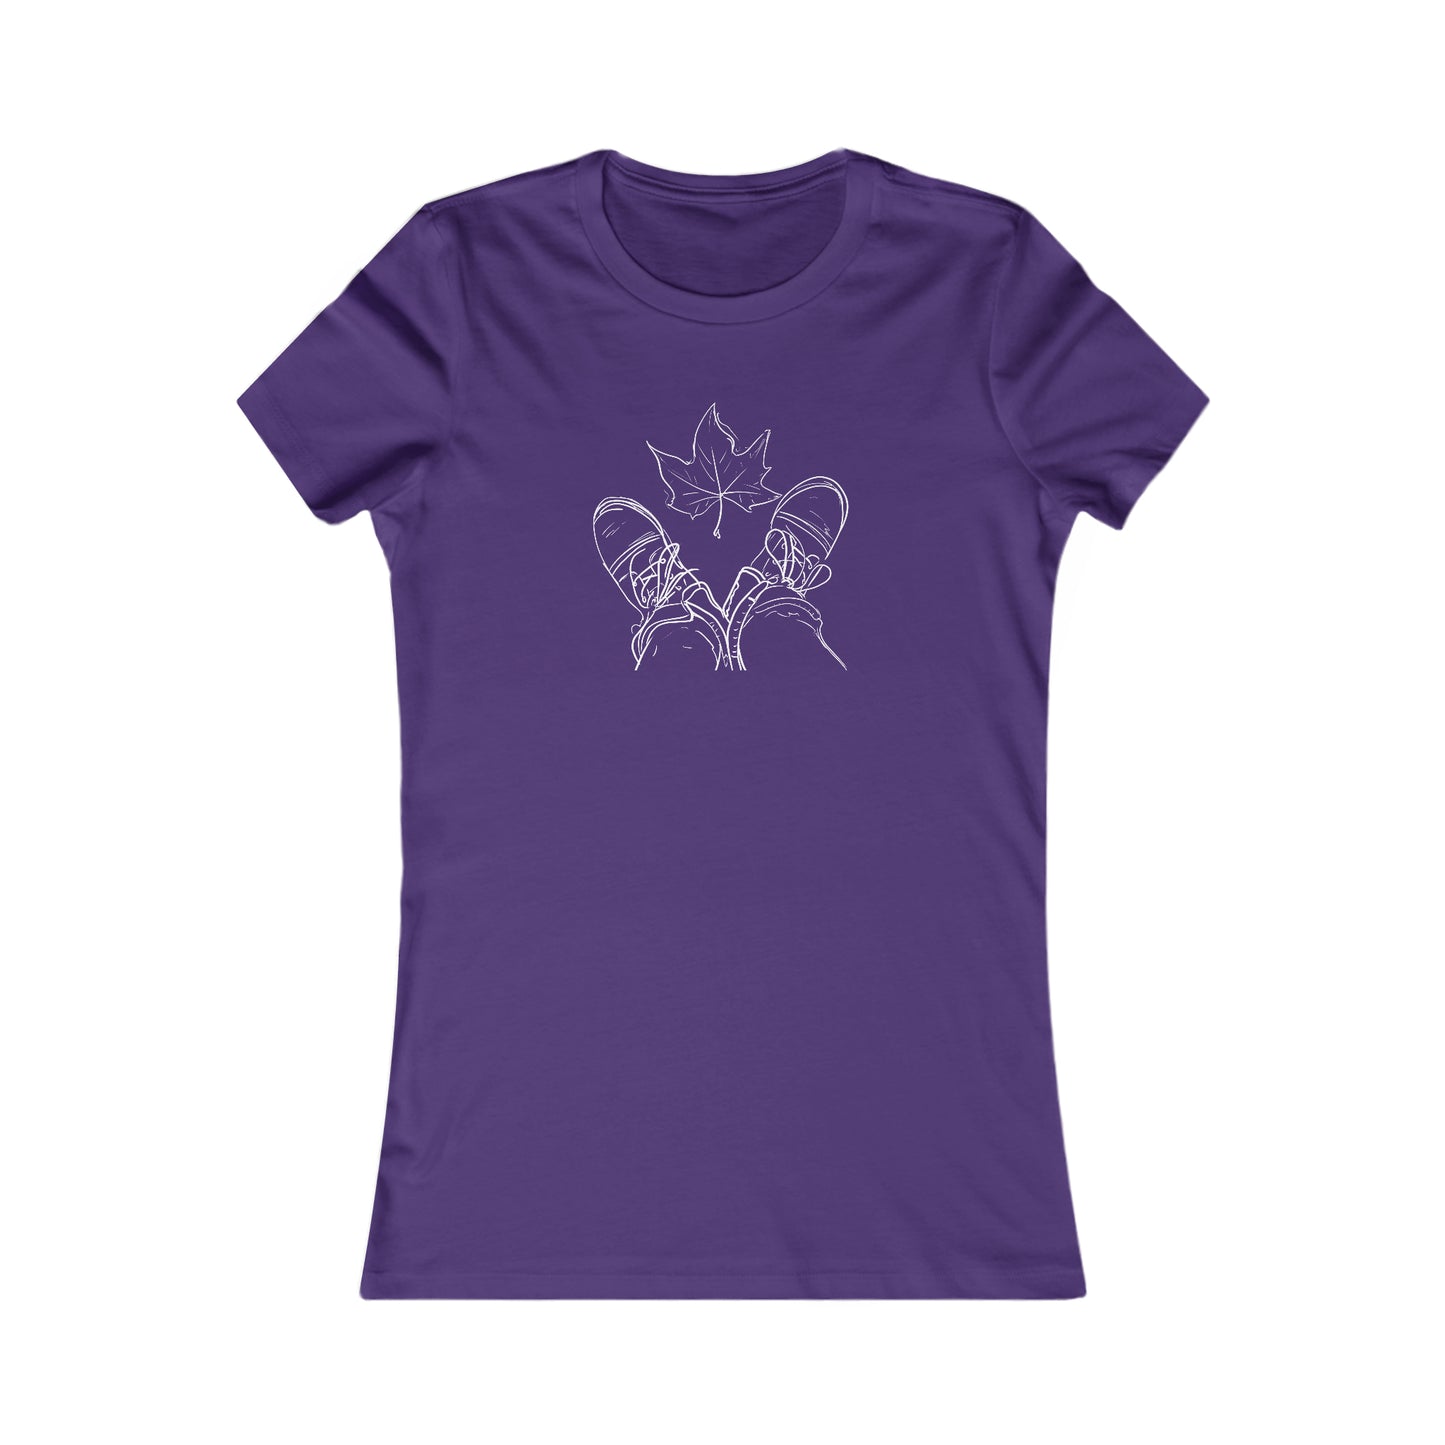 Fall Leaf and Boots Sketch - Women's T-Shirt